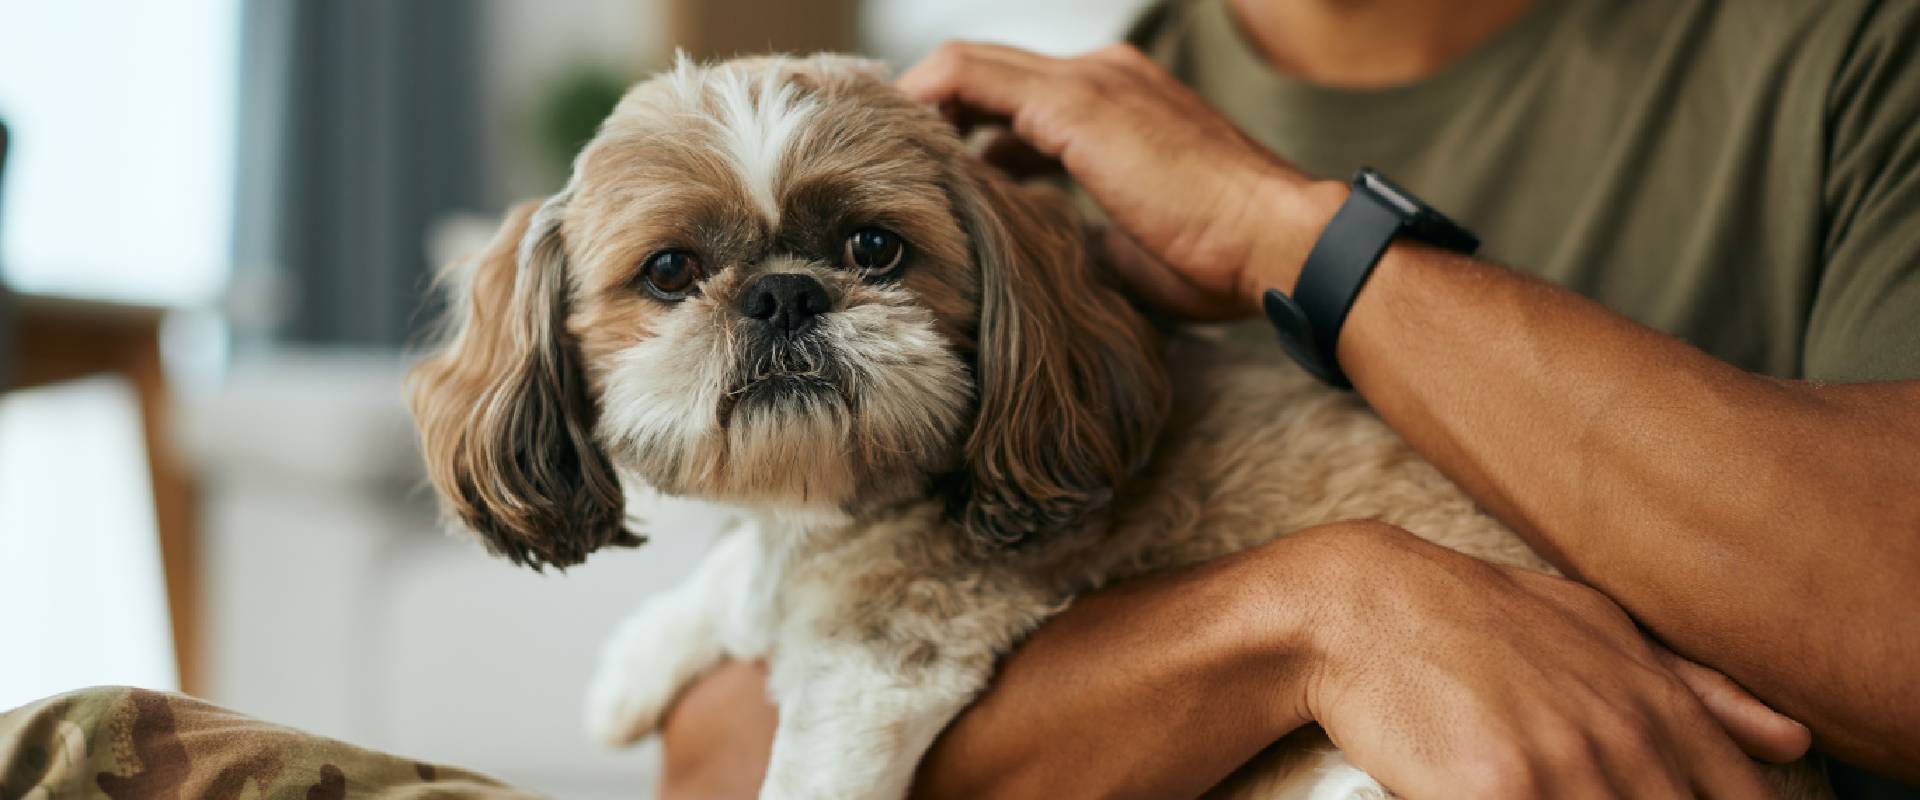 11 Shih Tzu Hairstyles Find The Best One for Your Dog